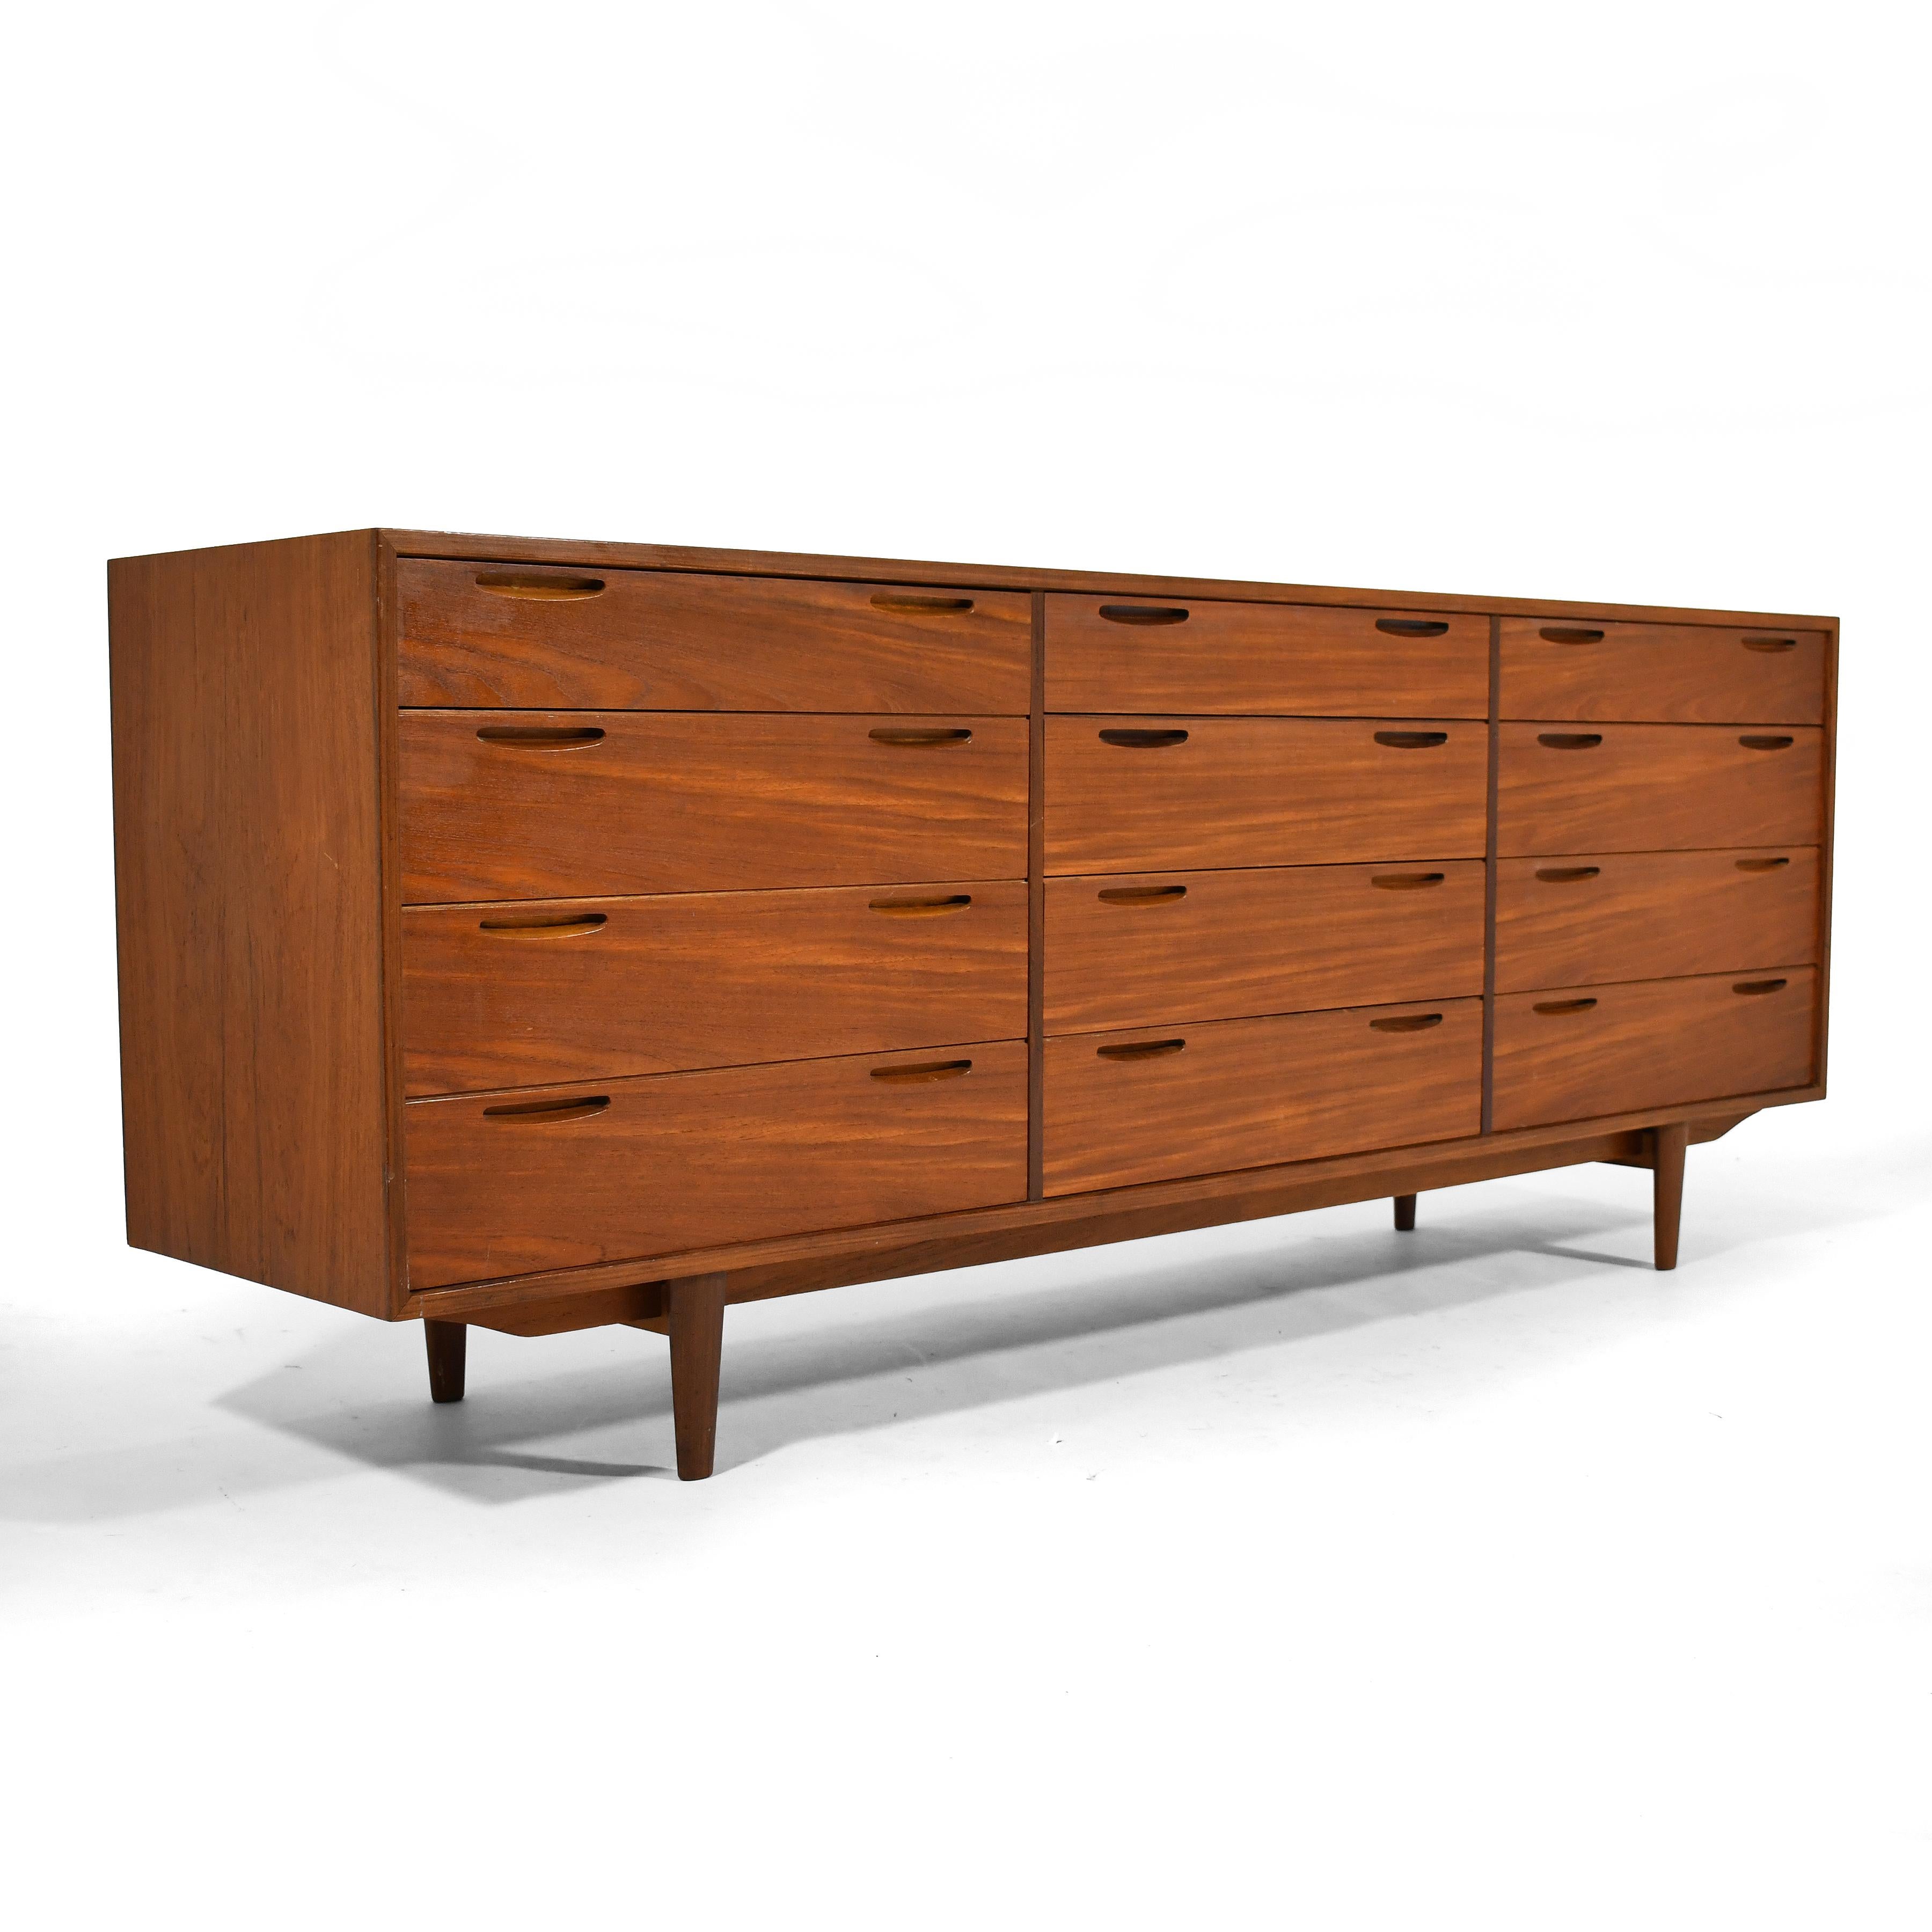 Designed by Ib Kofod-Larsen for Brande Møbelfabrik, this teak 12 drawer cabinet is beautifully constructed with dove-tailed drawer fronts with recessed pulls. It is perfectly suited for use as a dresser, credenza, or chest of drawers. The case is